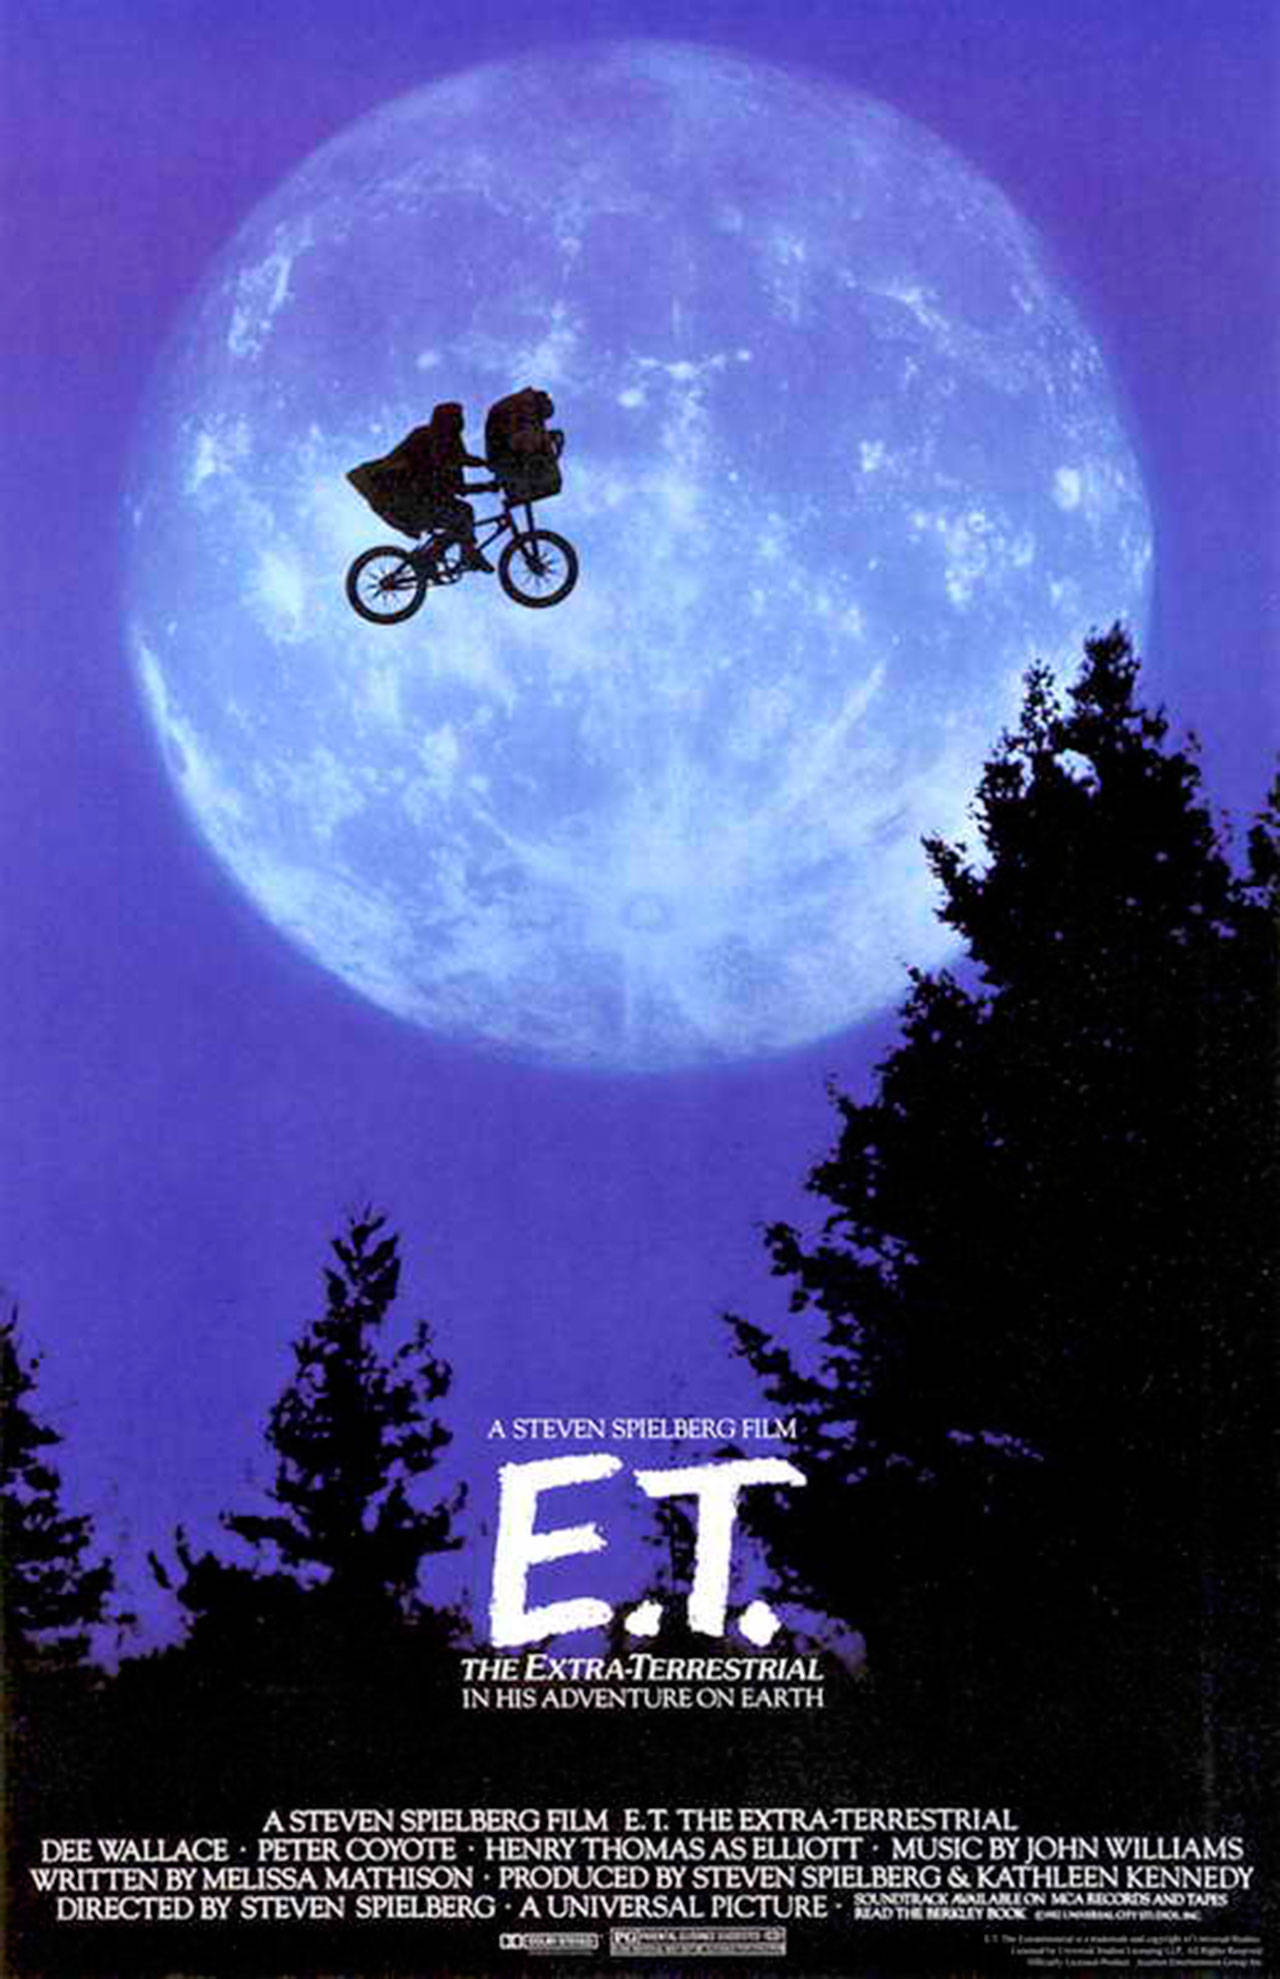 Image courtesy of Universal Pictures | “E.T. The Extra-Terrestrial,” widely considered one of the greatest films ever made, will fly back onto the big screen at Bainbridge Cinemas at 7 p.m. Wednesday, Sept. 20.